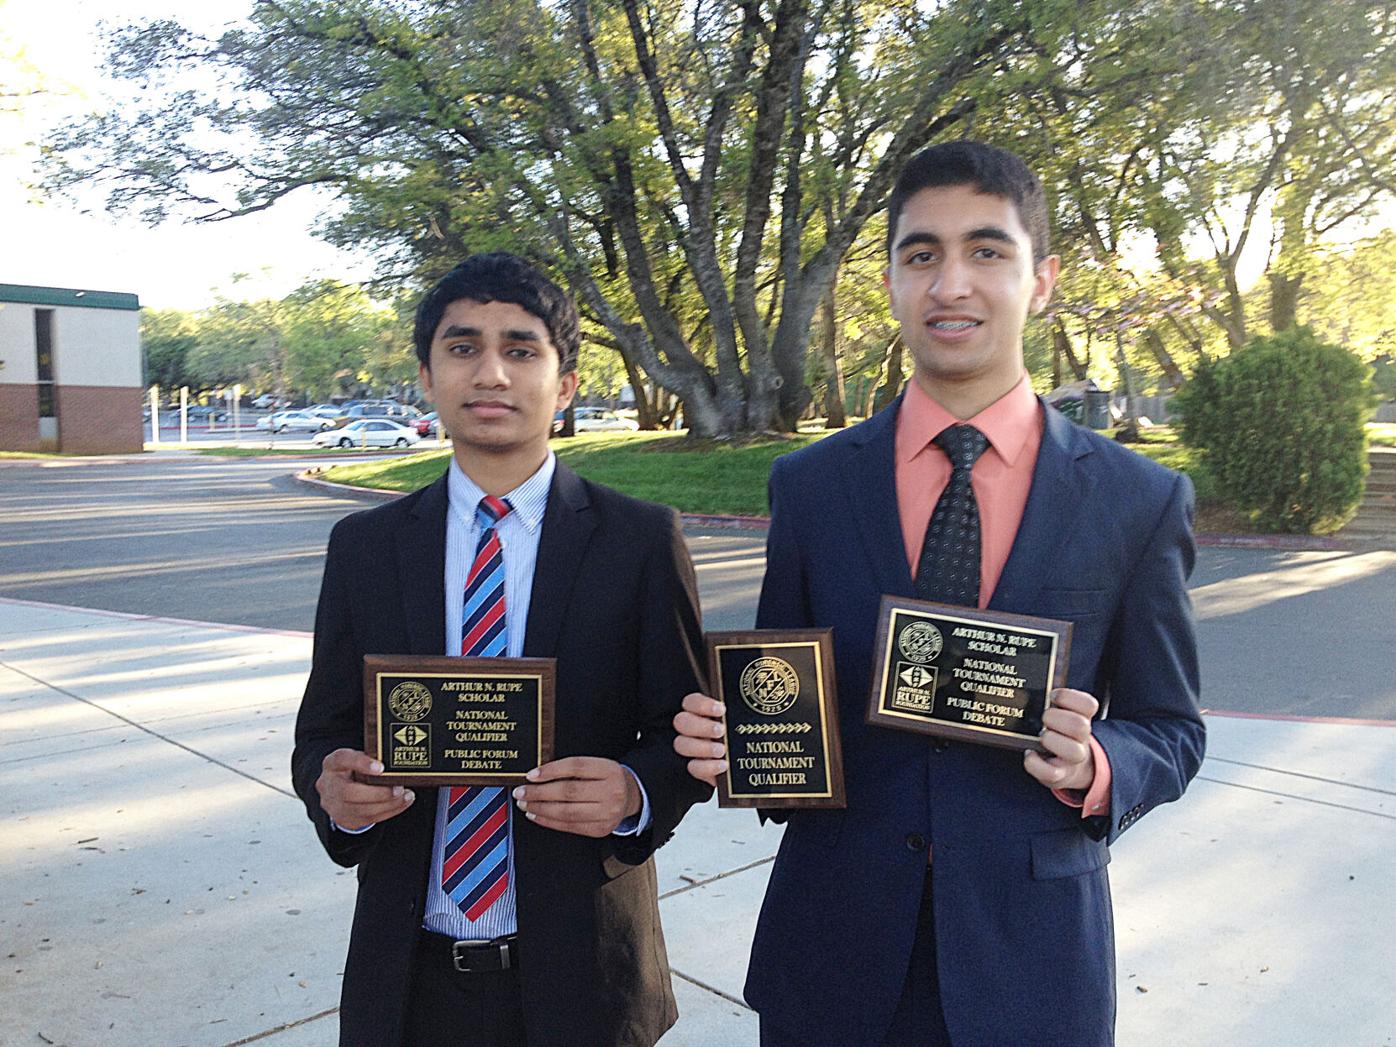 Two Trojans headed to national speech & debate competition, Local News